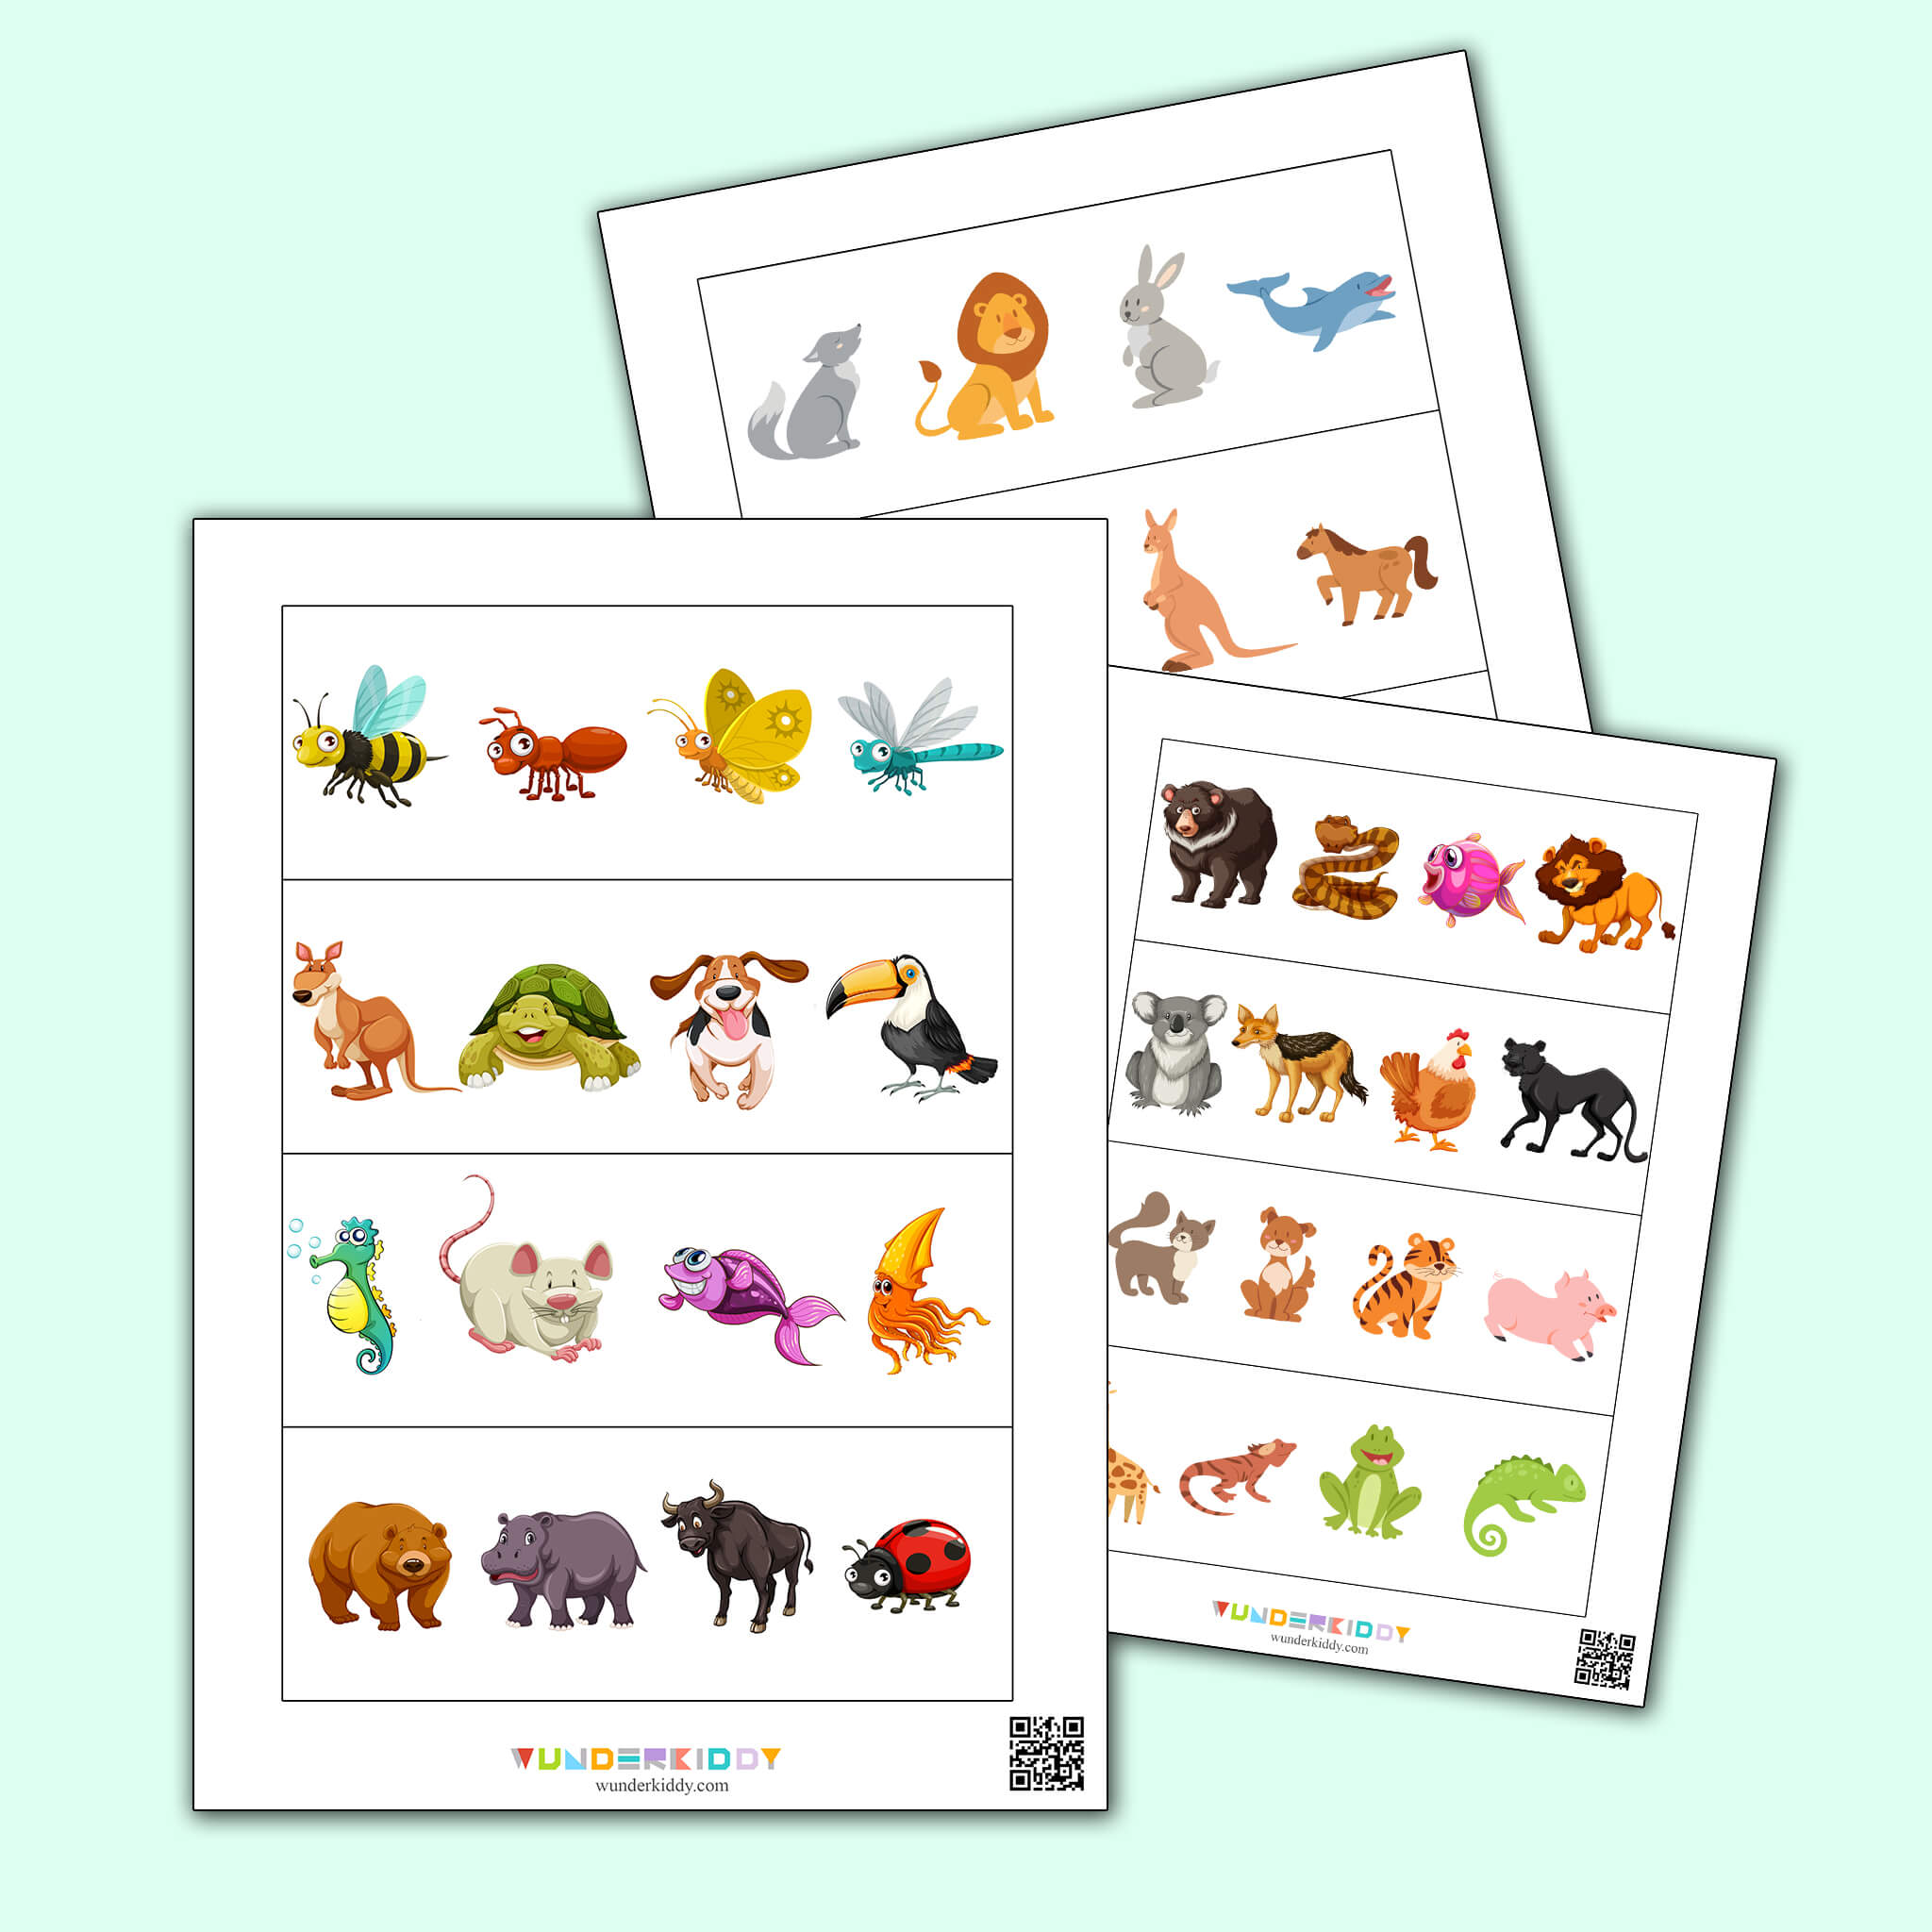 Worksheet for Preschoolers One is Out